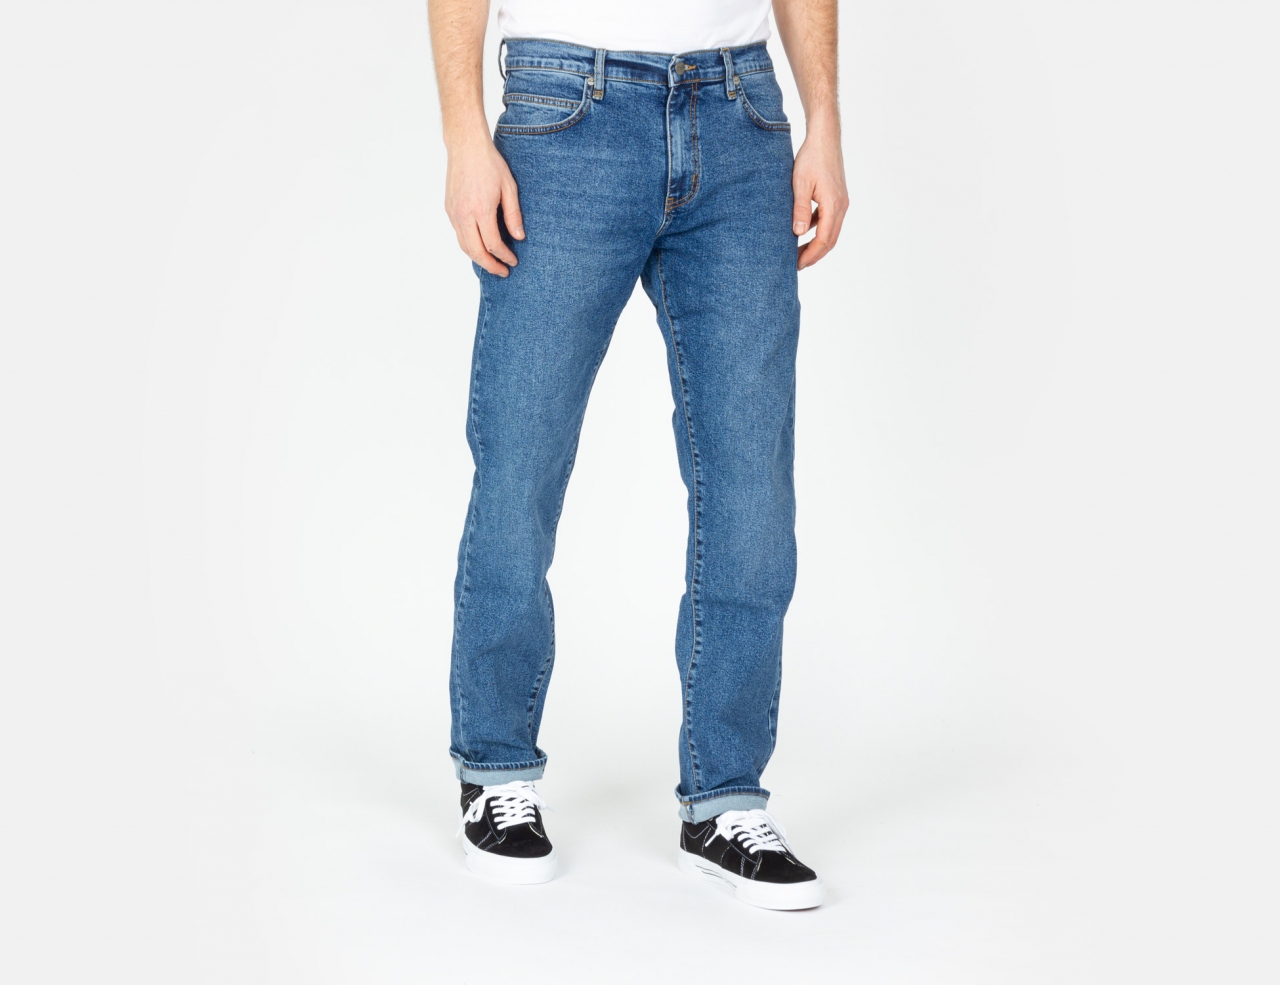 Reell Jeans Barfly Jeans - Retro Mid Blue